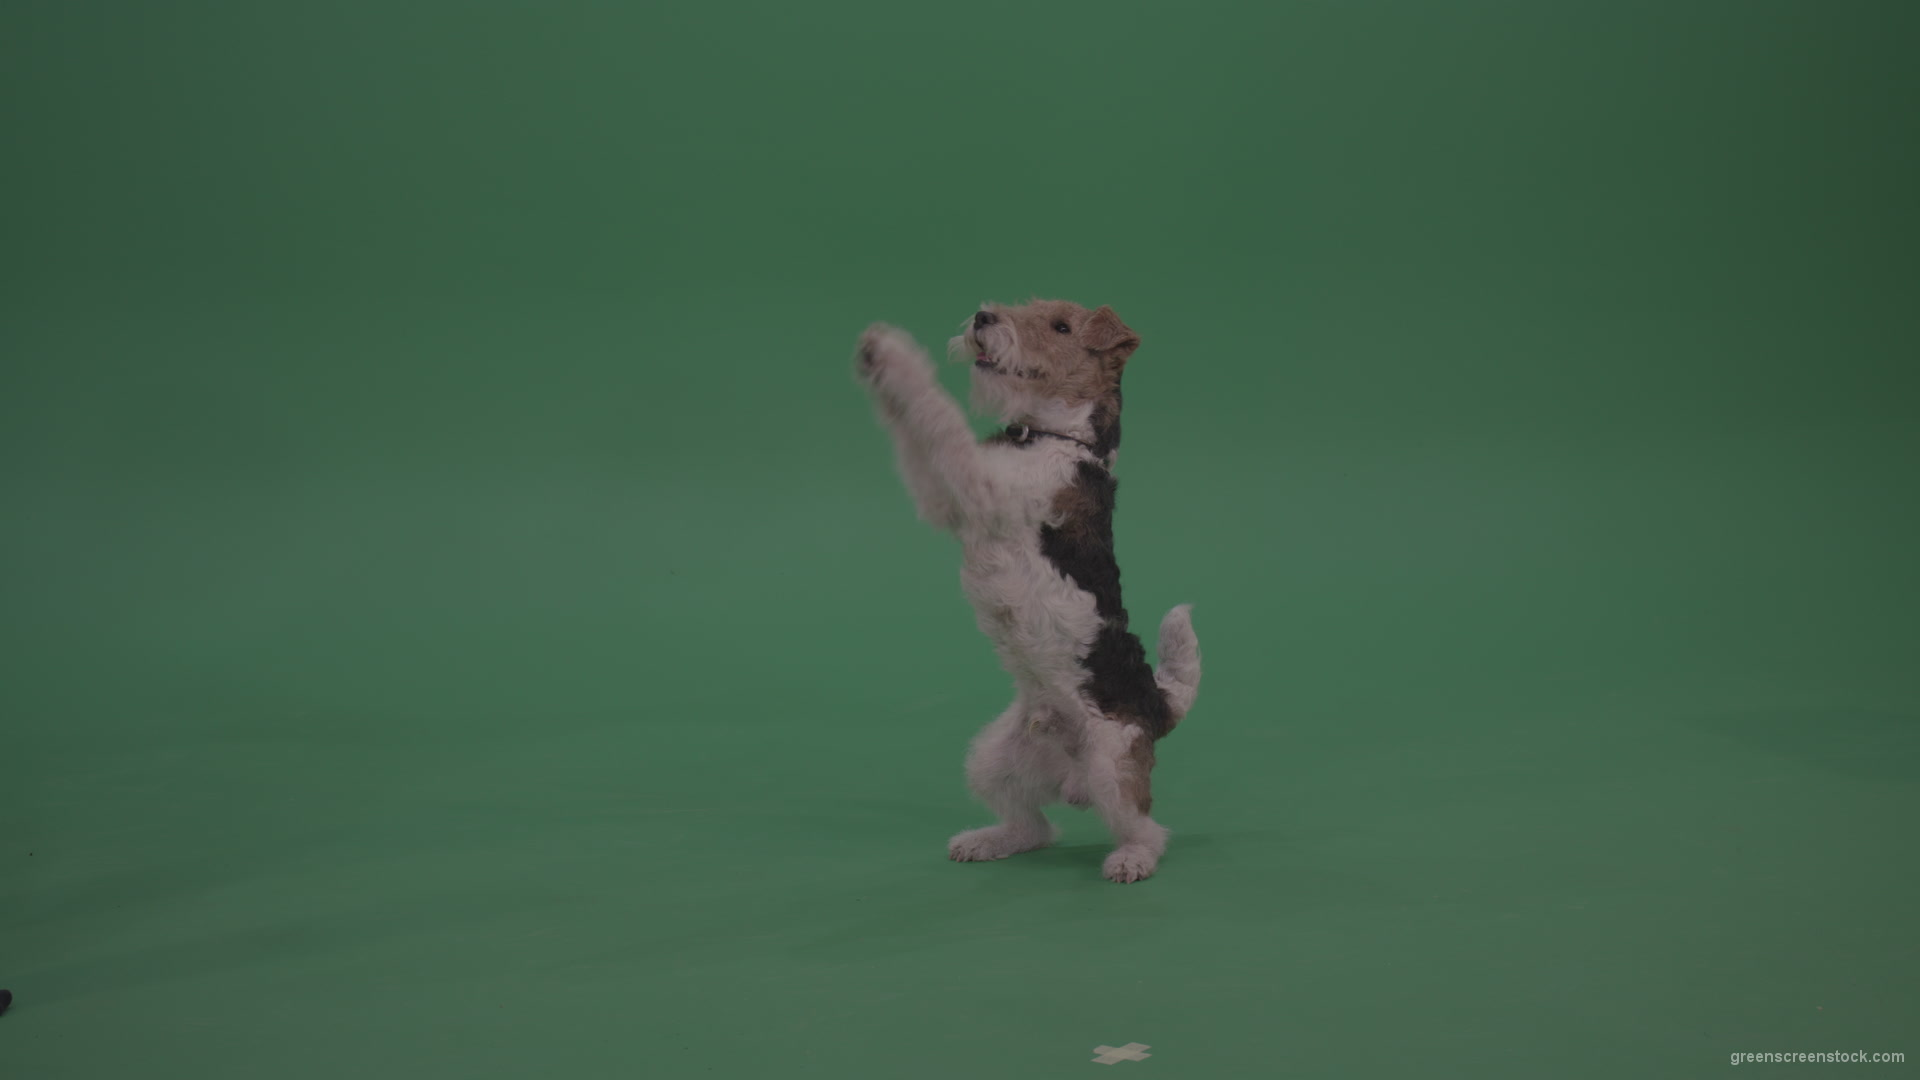 Wire-Fox-Terrier-Standing-On-Back-Feet-Ann-Serving-Then-Lies-Down-On-The-Ground-On-Green-Screen-Wall-Background_001 Green Screen Stock